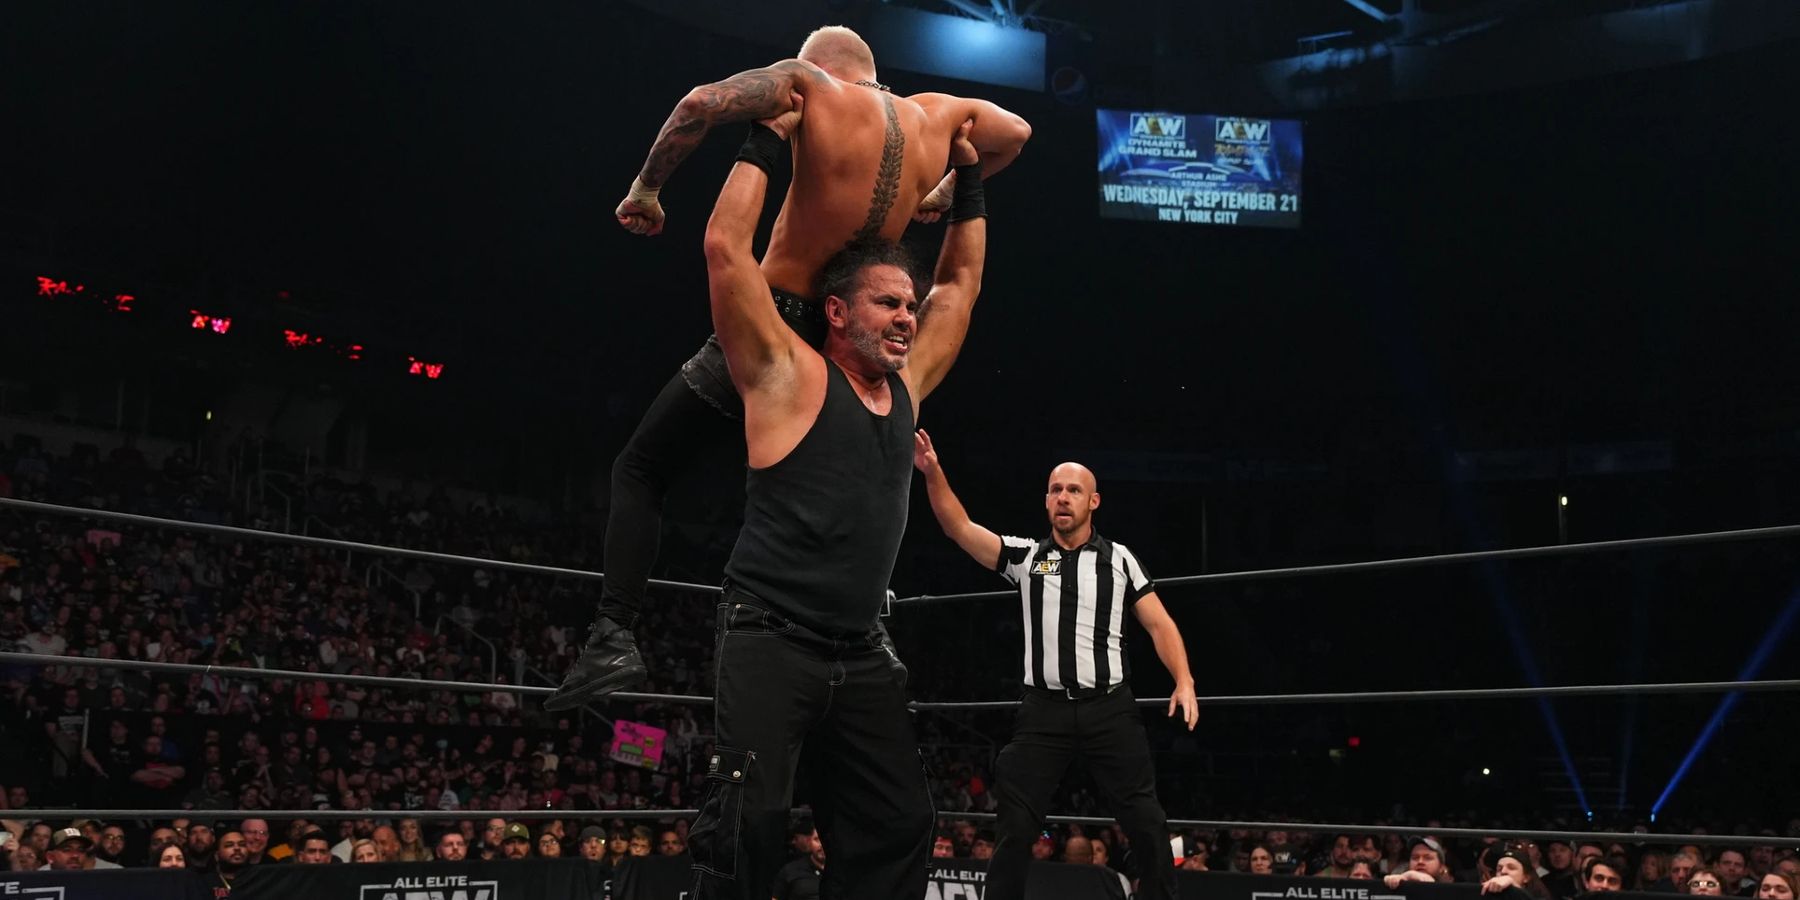 Matt Hardy lifts Darby Allin above his head for a slam during their match on AEW Rampage in 2022.